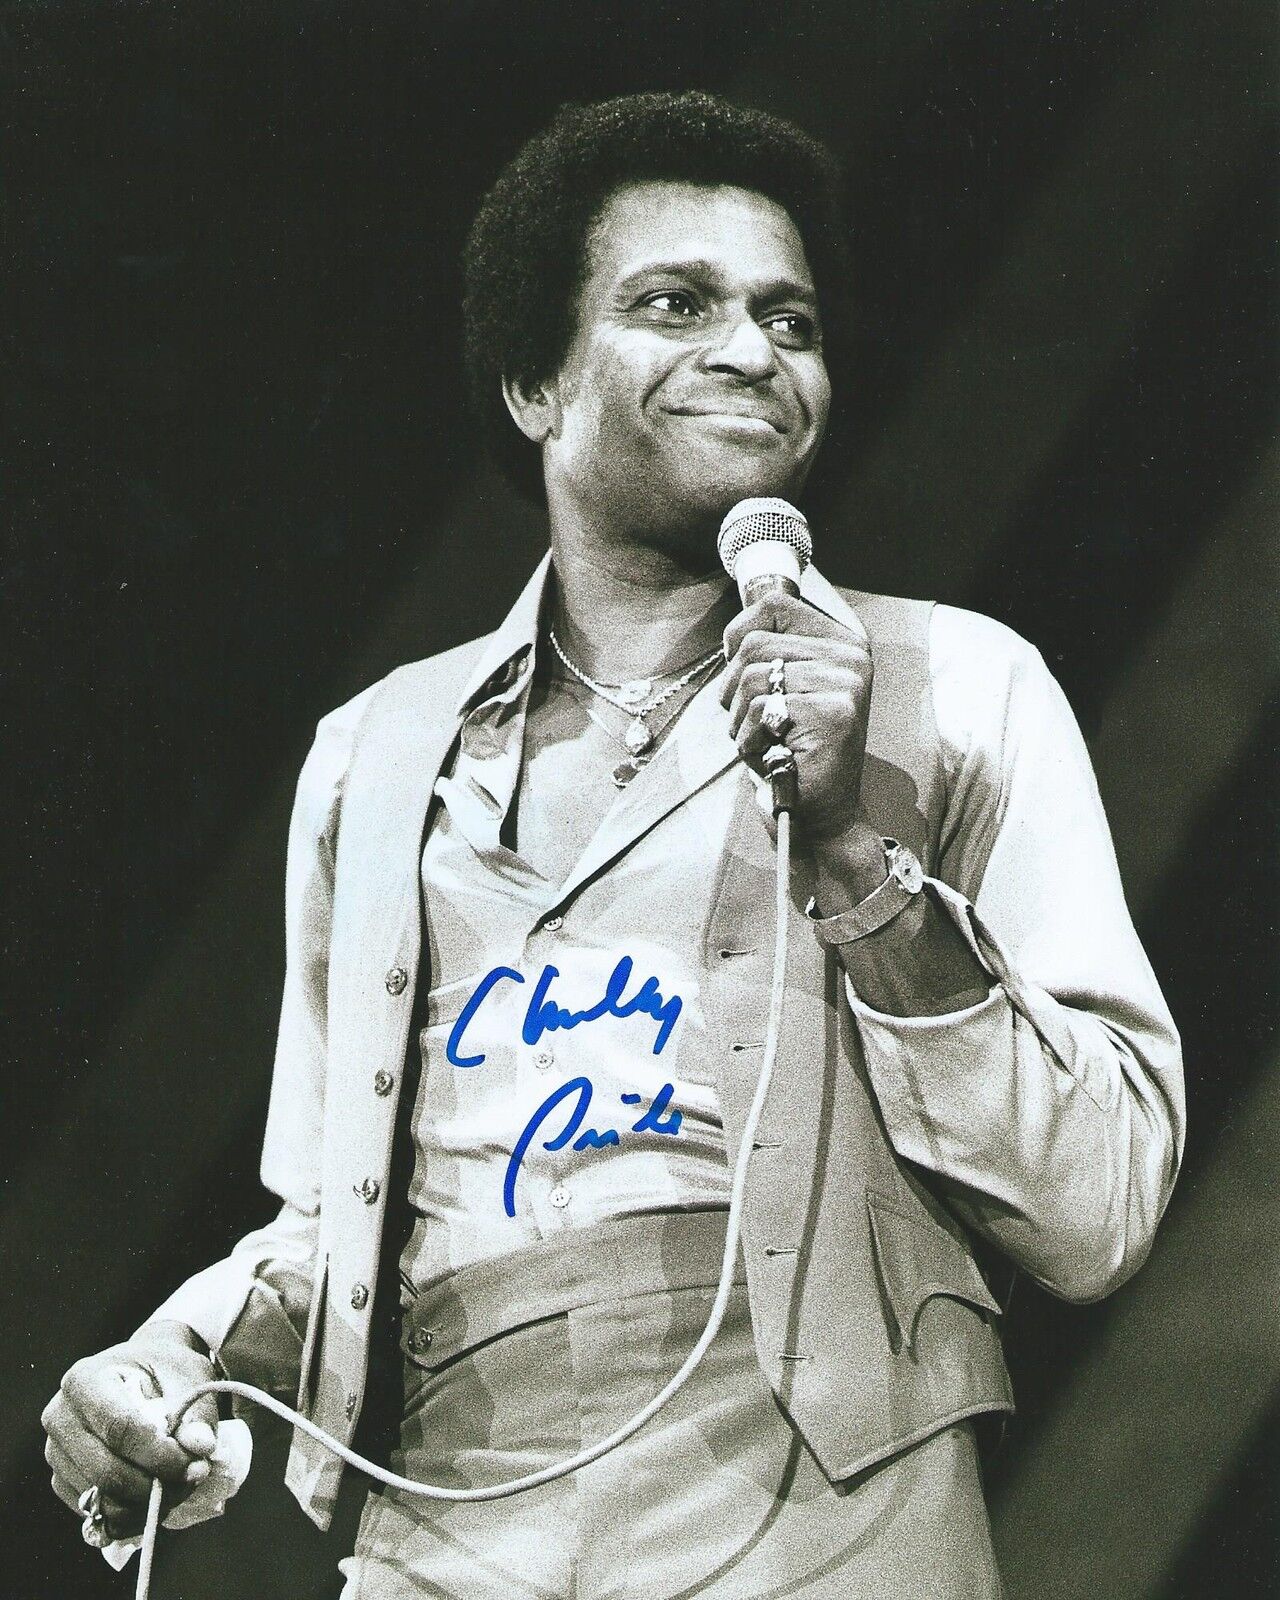 **GFA American Country Singer *CHARLEY PRIDE* Signed 8x10 Photo Poster painting AD4 COA**